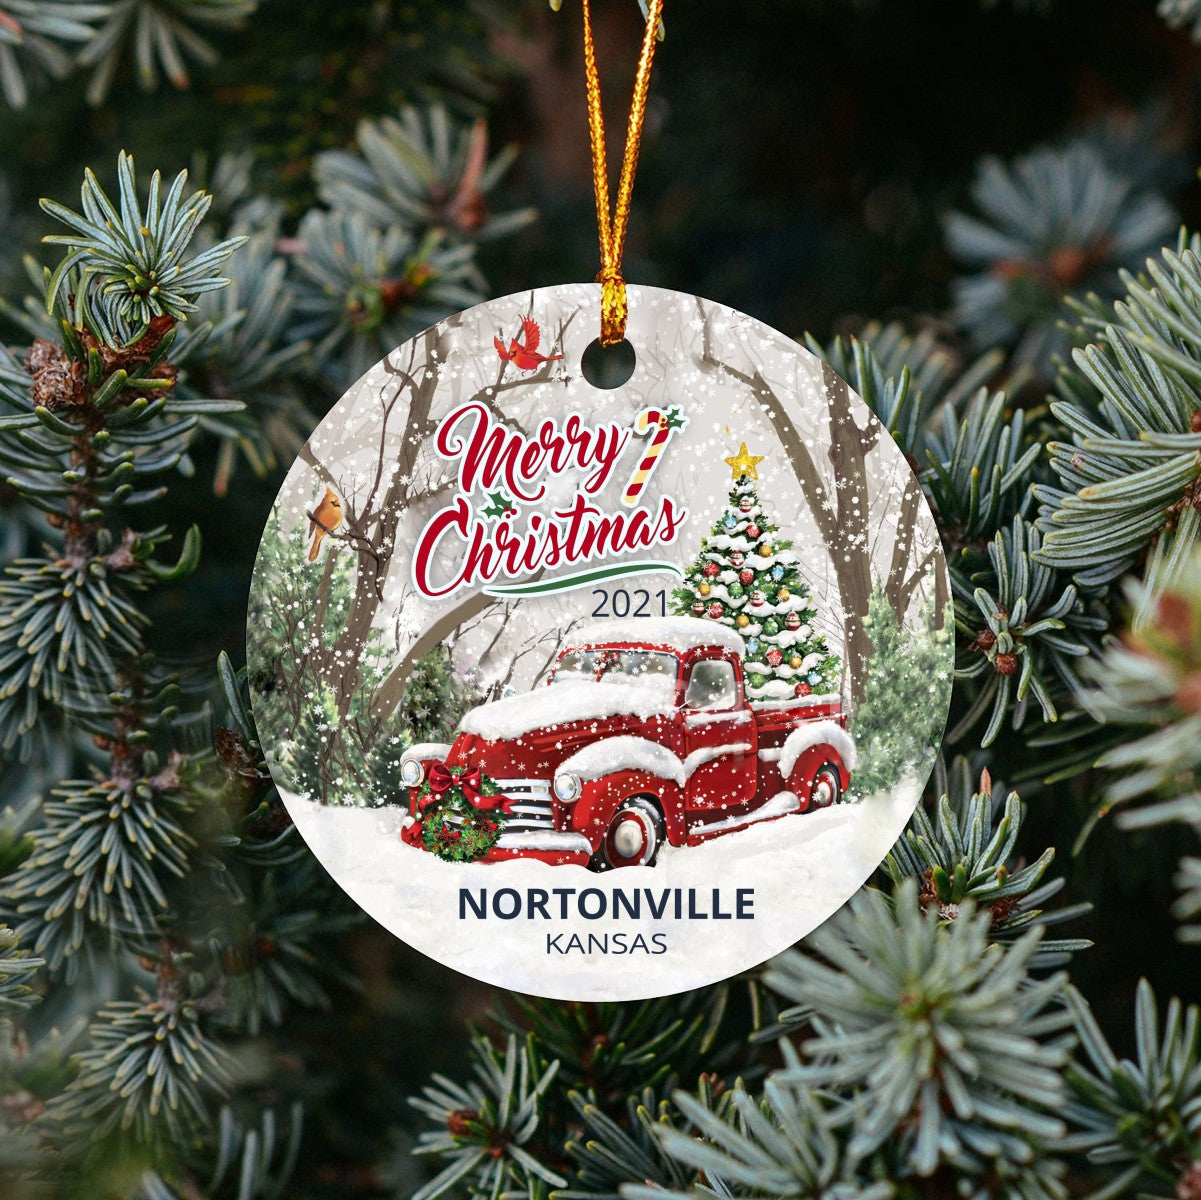 Christmas Tree Ornaments Nortonville - Ornament With Name City, State Nortonville Kansas KS Ornament - Red Truck Xmas Ornaments 3'' Plastic Gift For Family, Friend And Housewarming